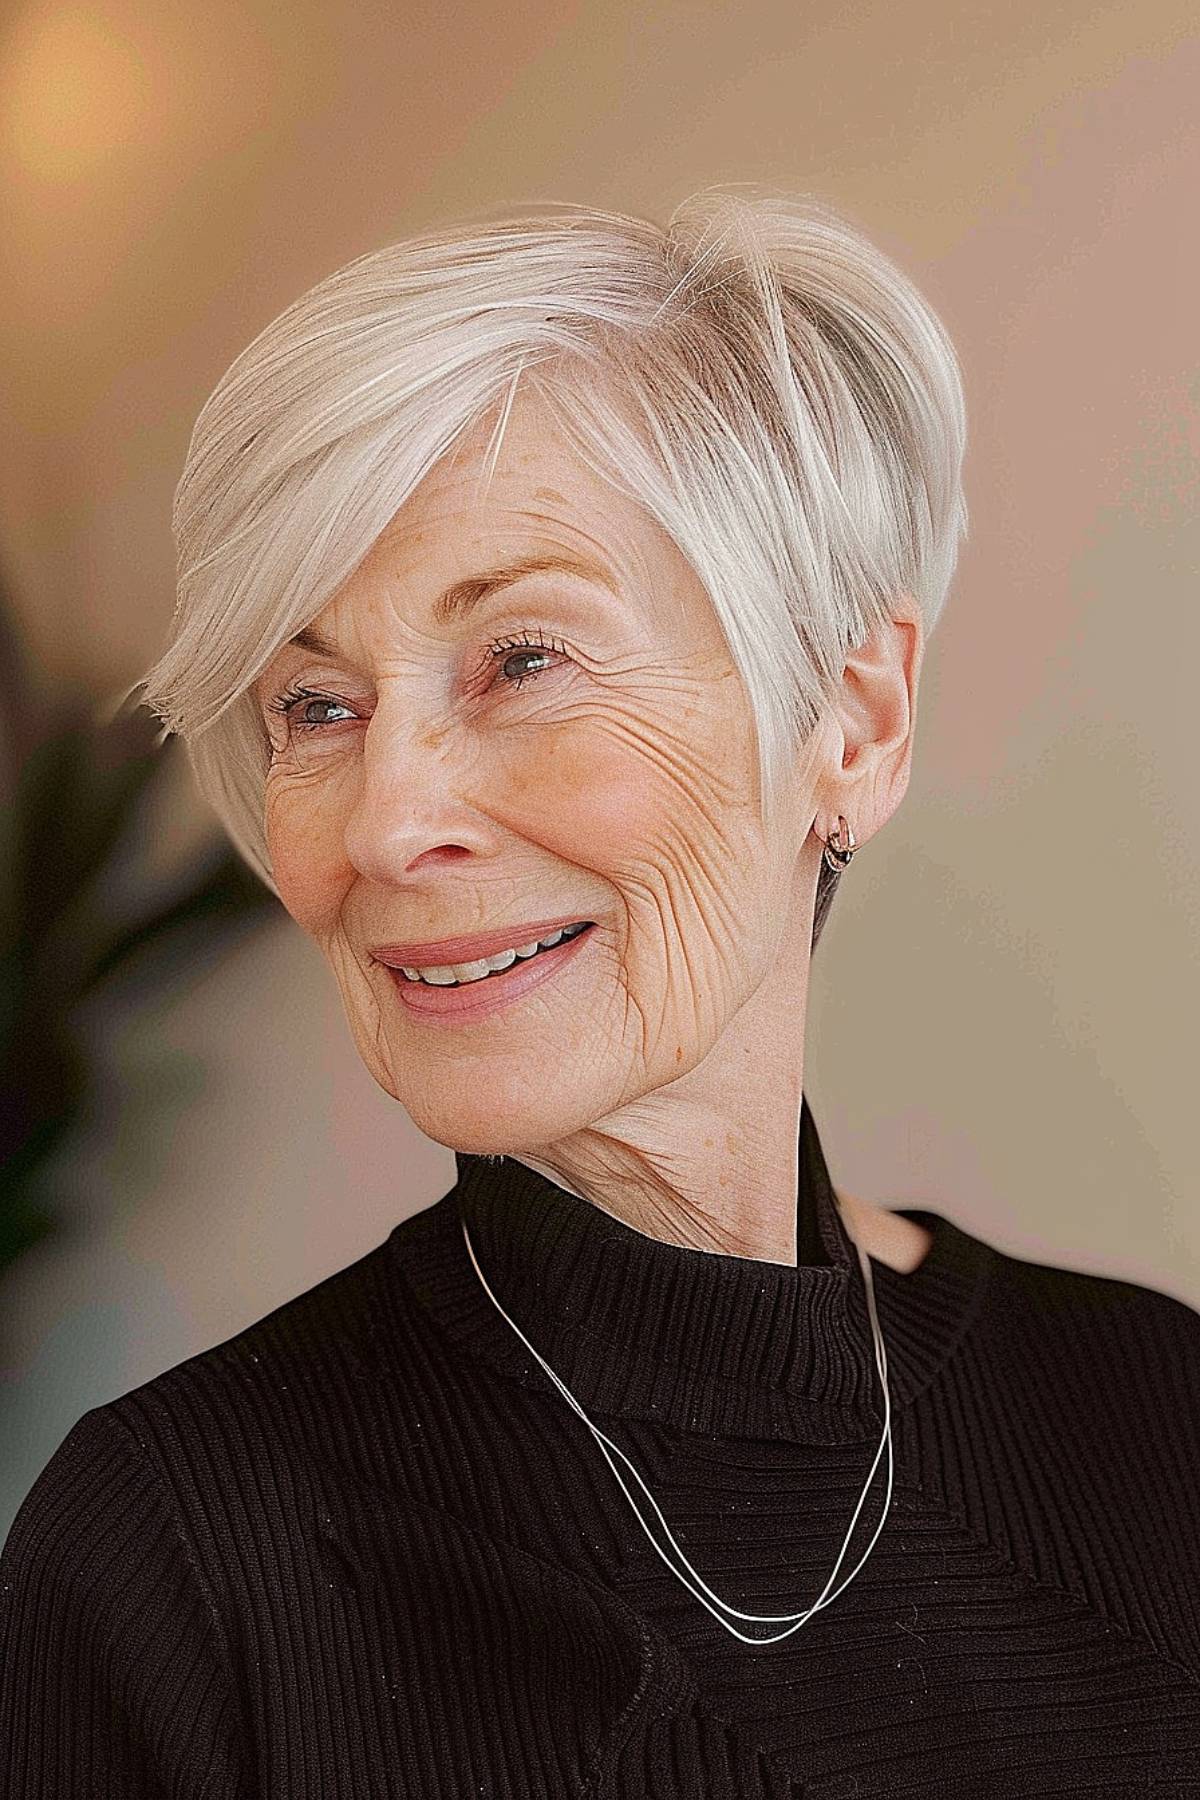 A stylish woman over 70 with an angular pixie cut that exudes confidence and graceful aging.